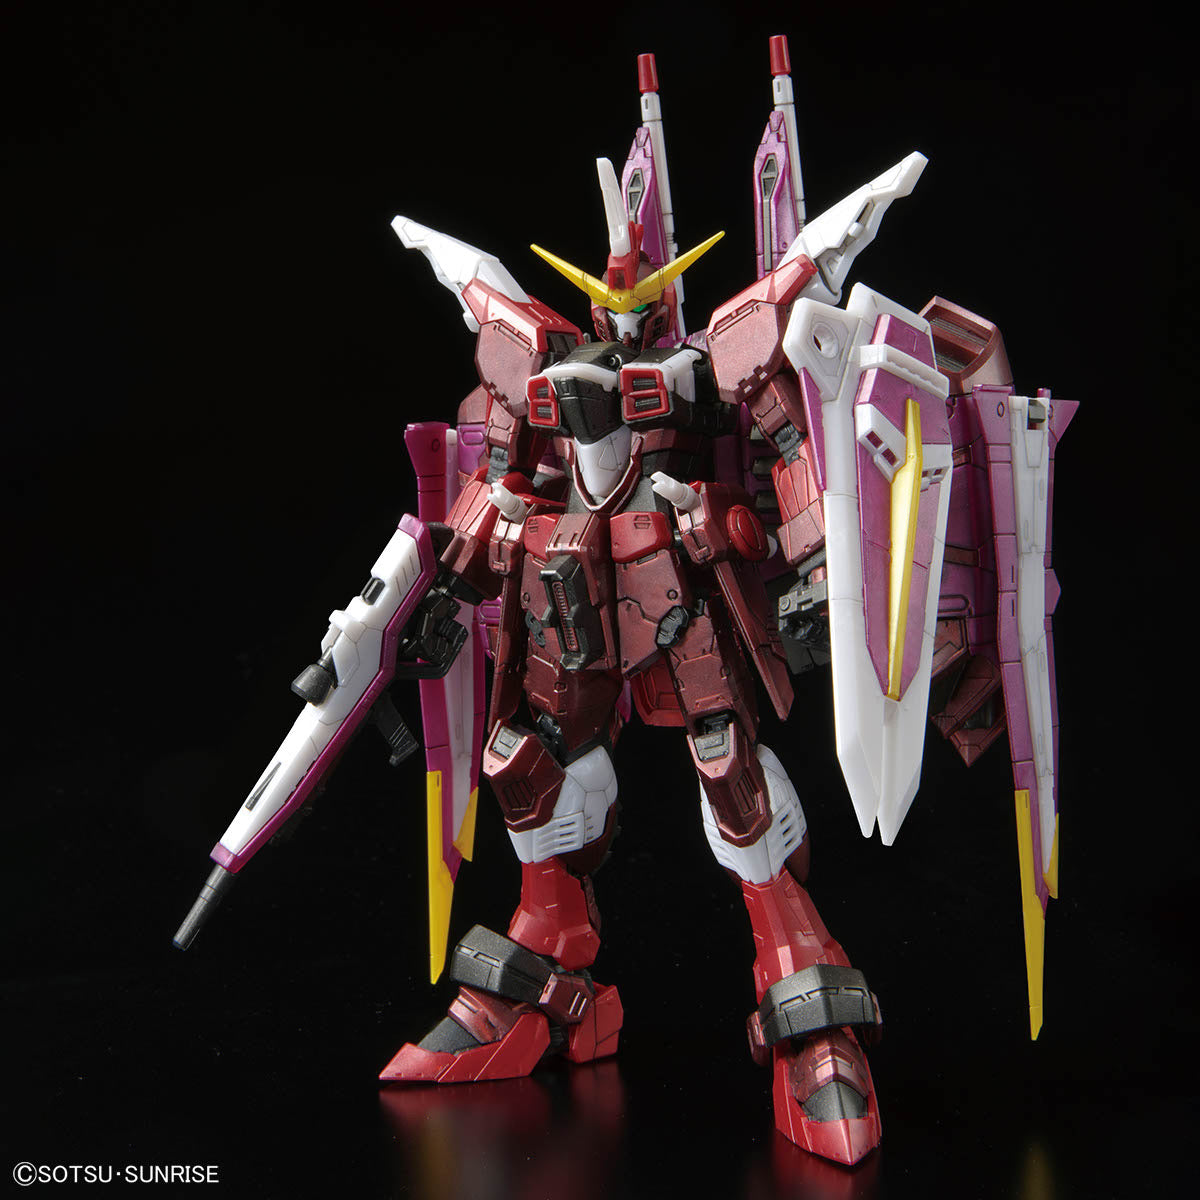 RG 1/144 "Mobile Suit Gundam SEED" 20th Anniversary MS Set [Metallic] (March & April Ship Date)